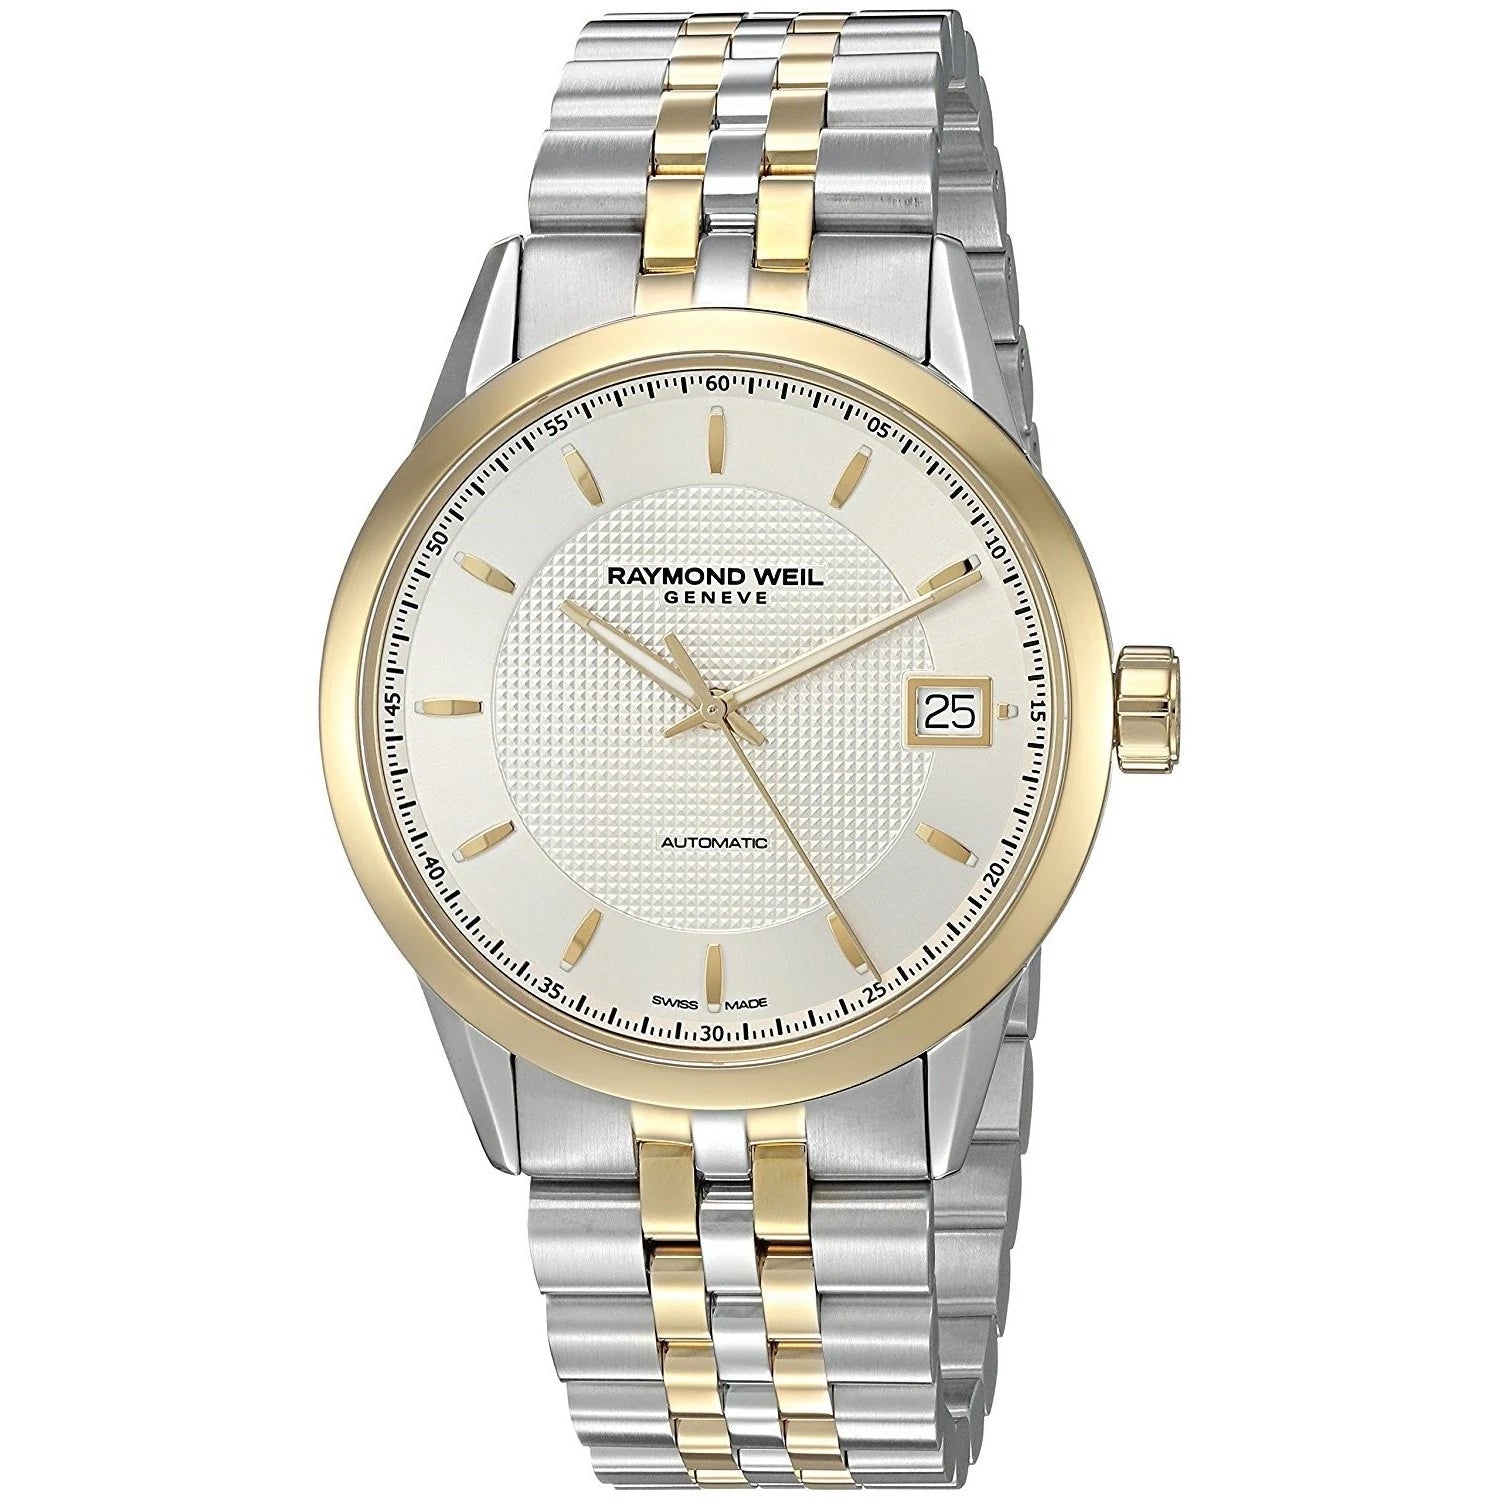 Raymond Weil Men's Automatic Movement Gold Dial Watch - RW-0013